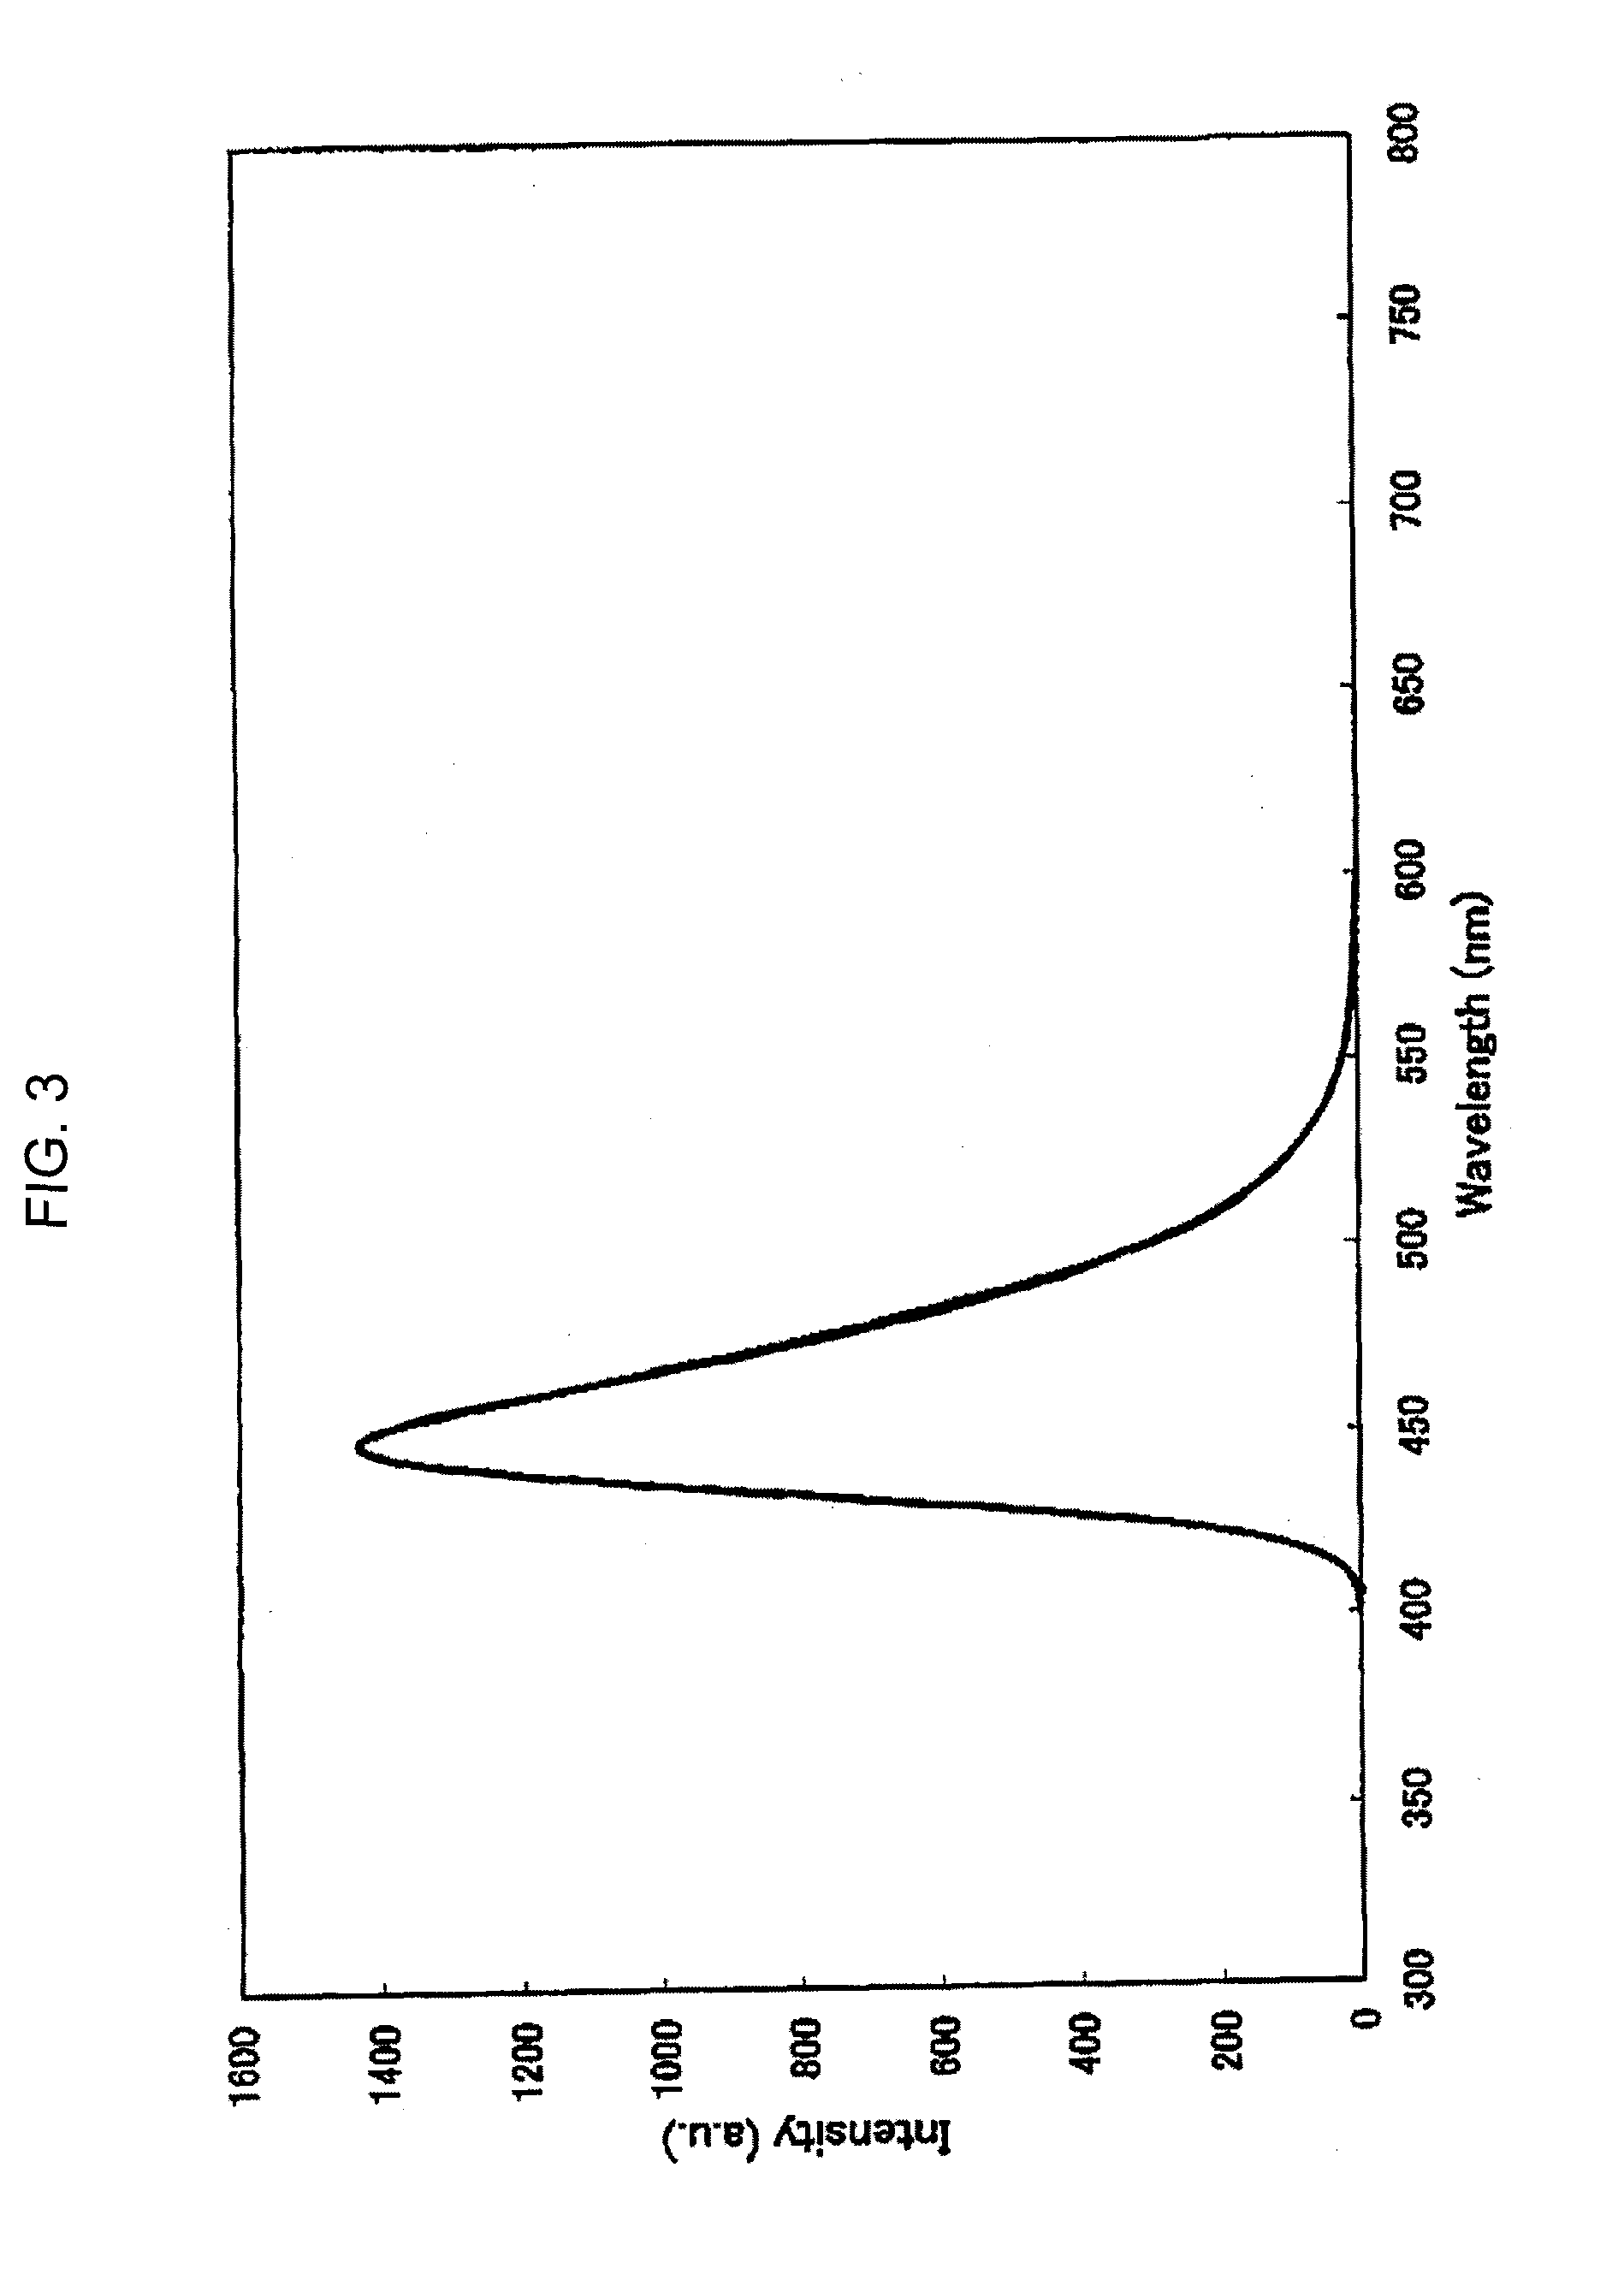 Material for organic electroluminescent element and organic electroluminescent element employing the same